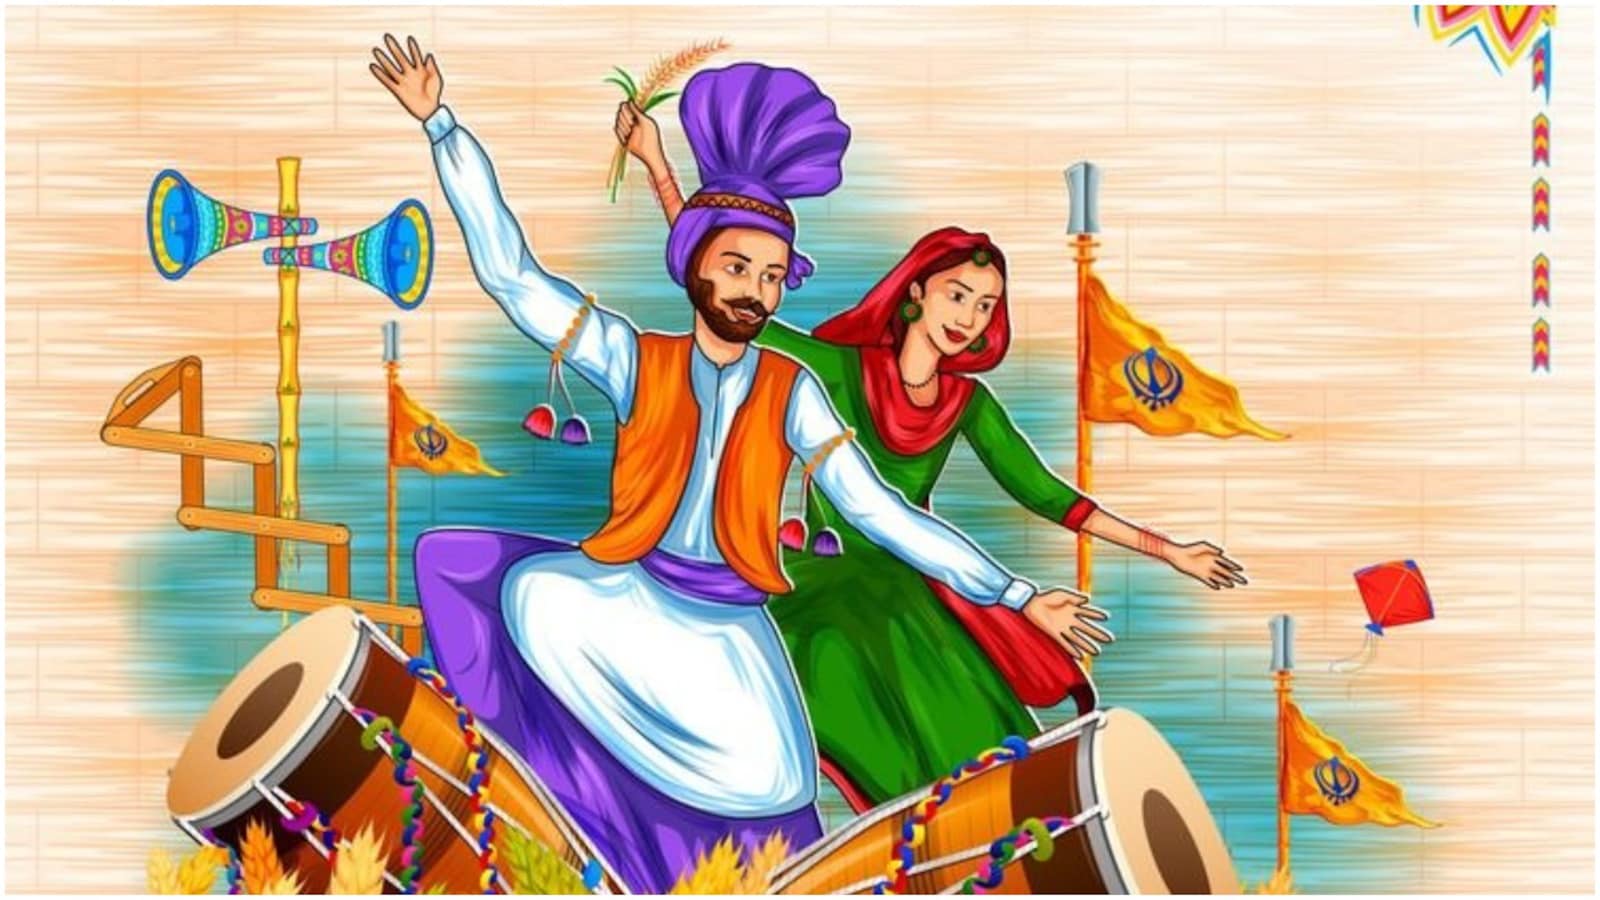 Happy Vaisakhi 2022: Wishes, images, greetings, messages, Facebook and  WhatsApp status to share on harvest festival